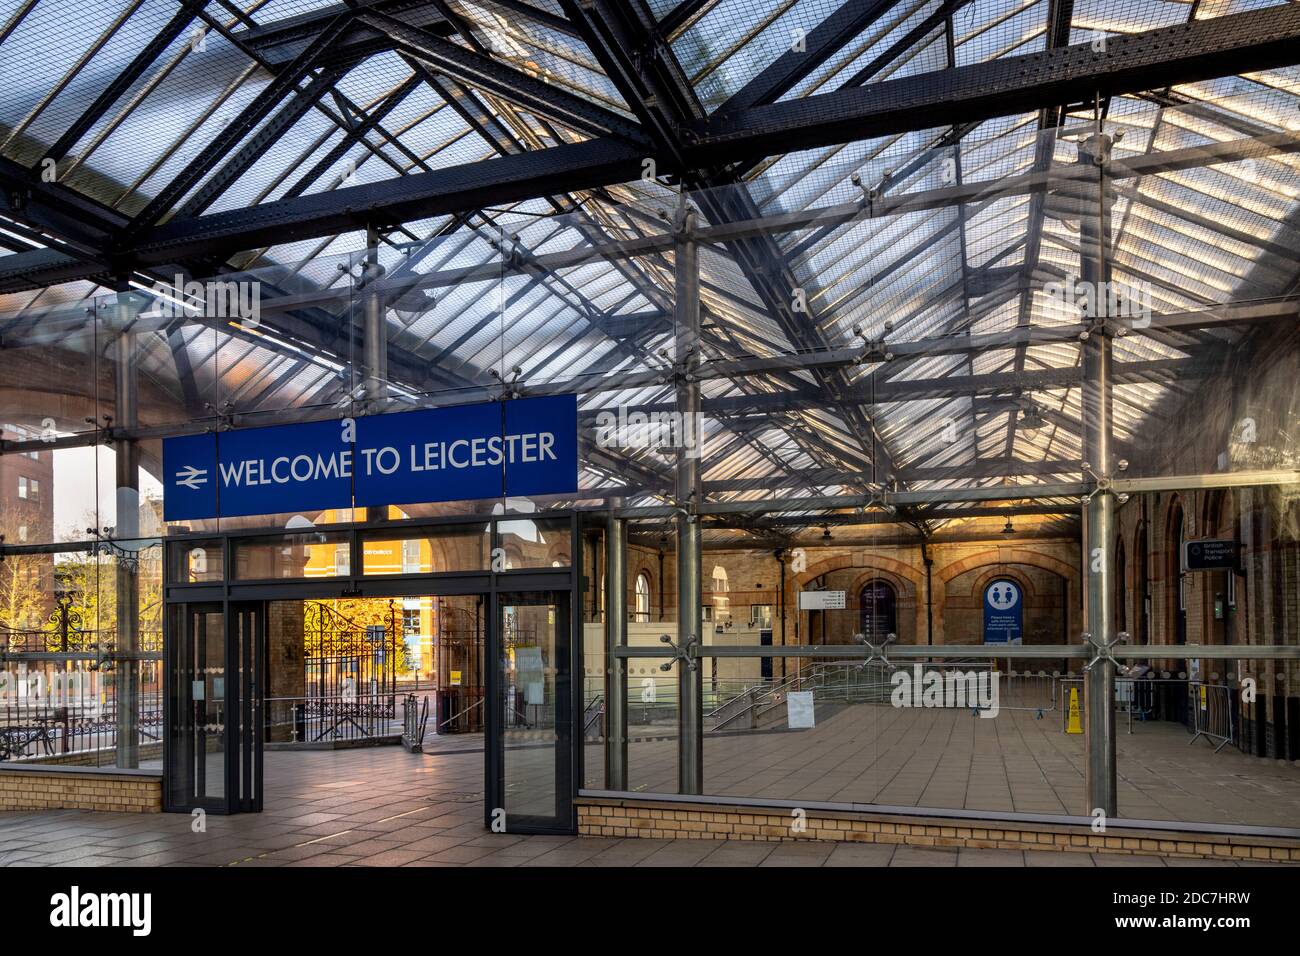 'Welcome To Leicester' sign in Leicester Railway Station, Leicester, England Stock Photo